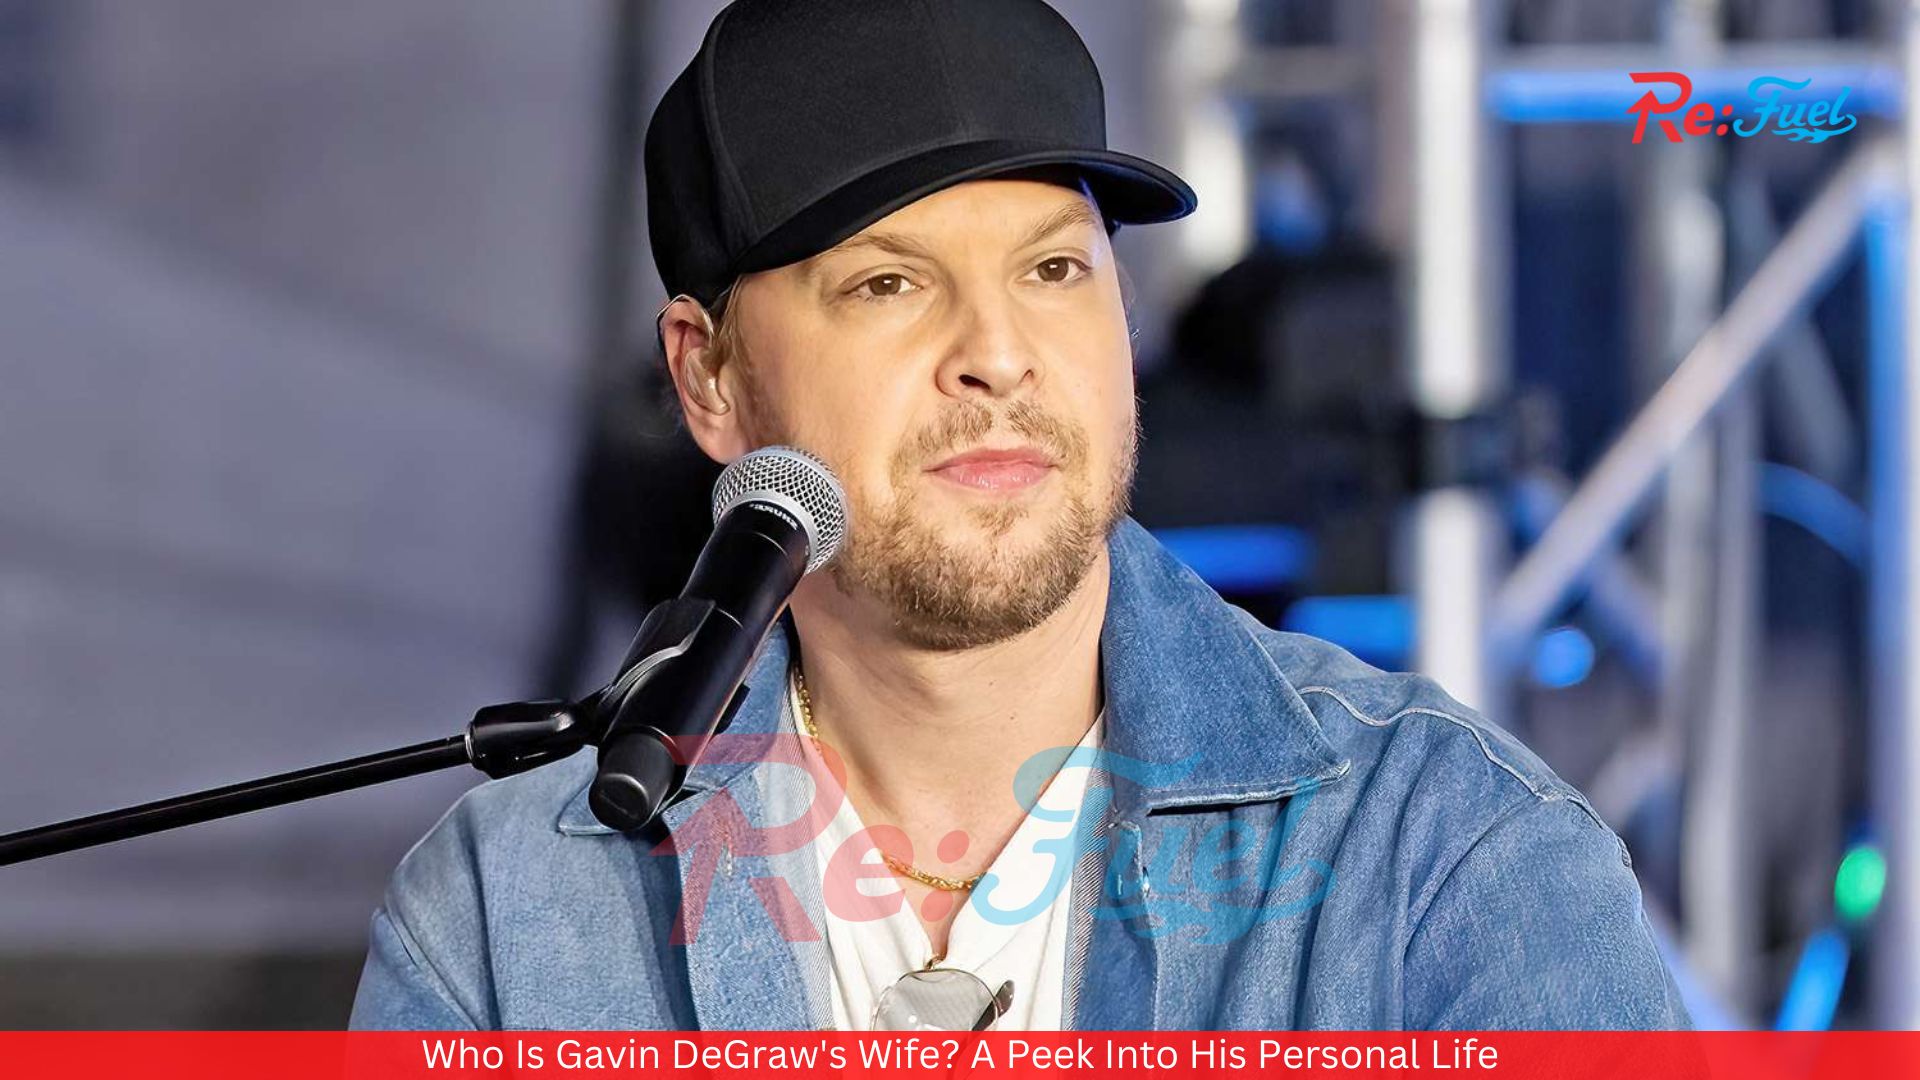 Who Is Gavin DeGraw's Wife? A Peek Into His Personal Life